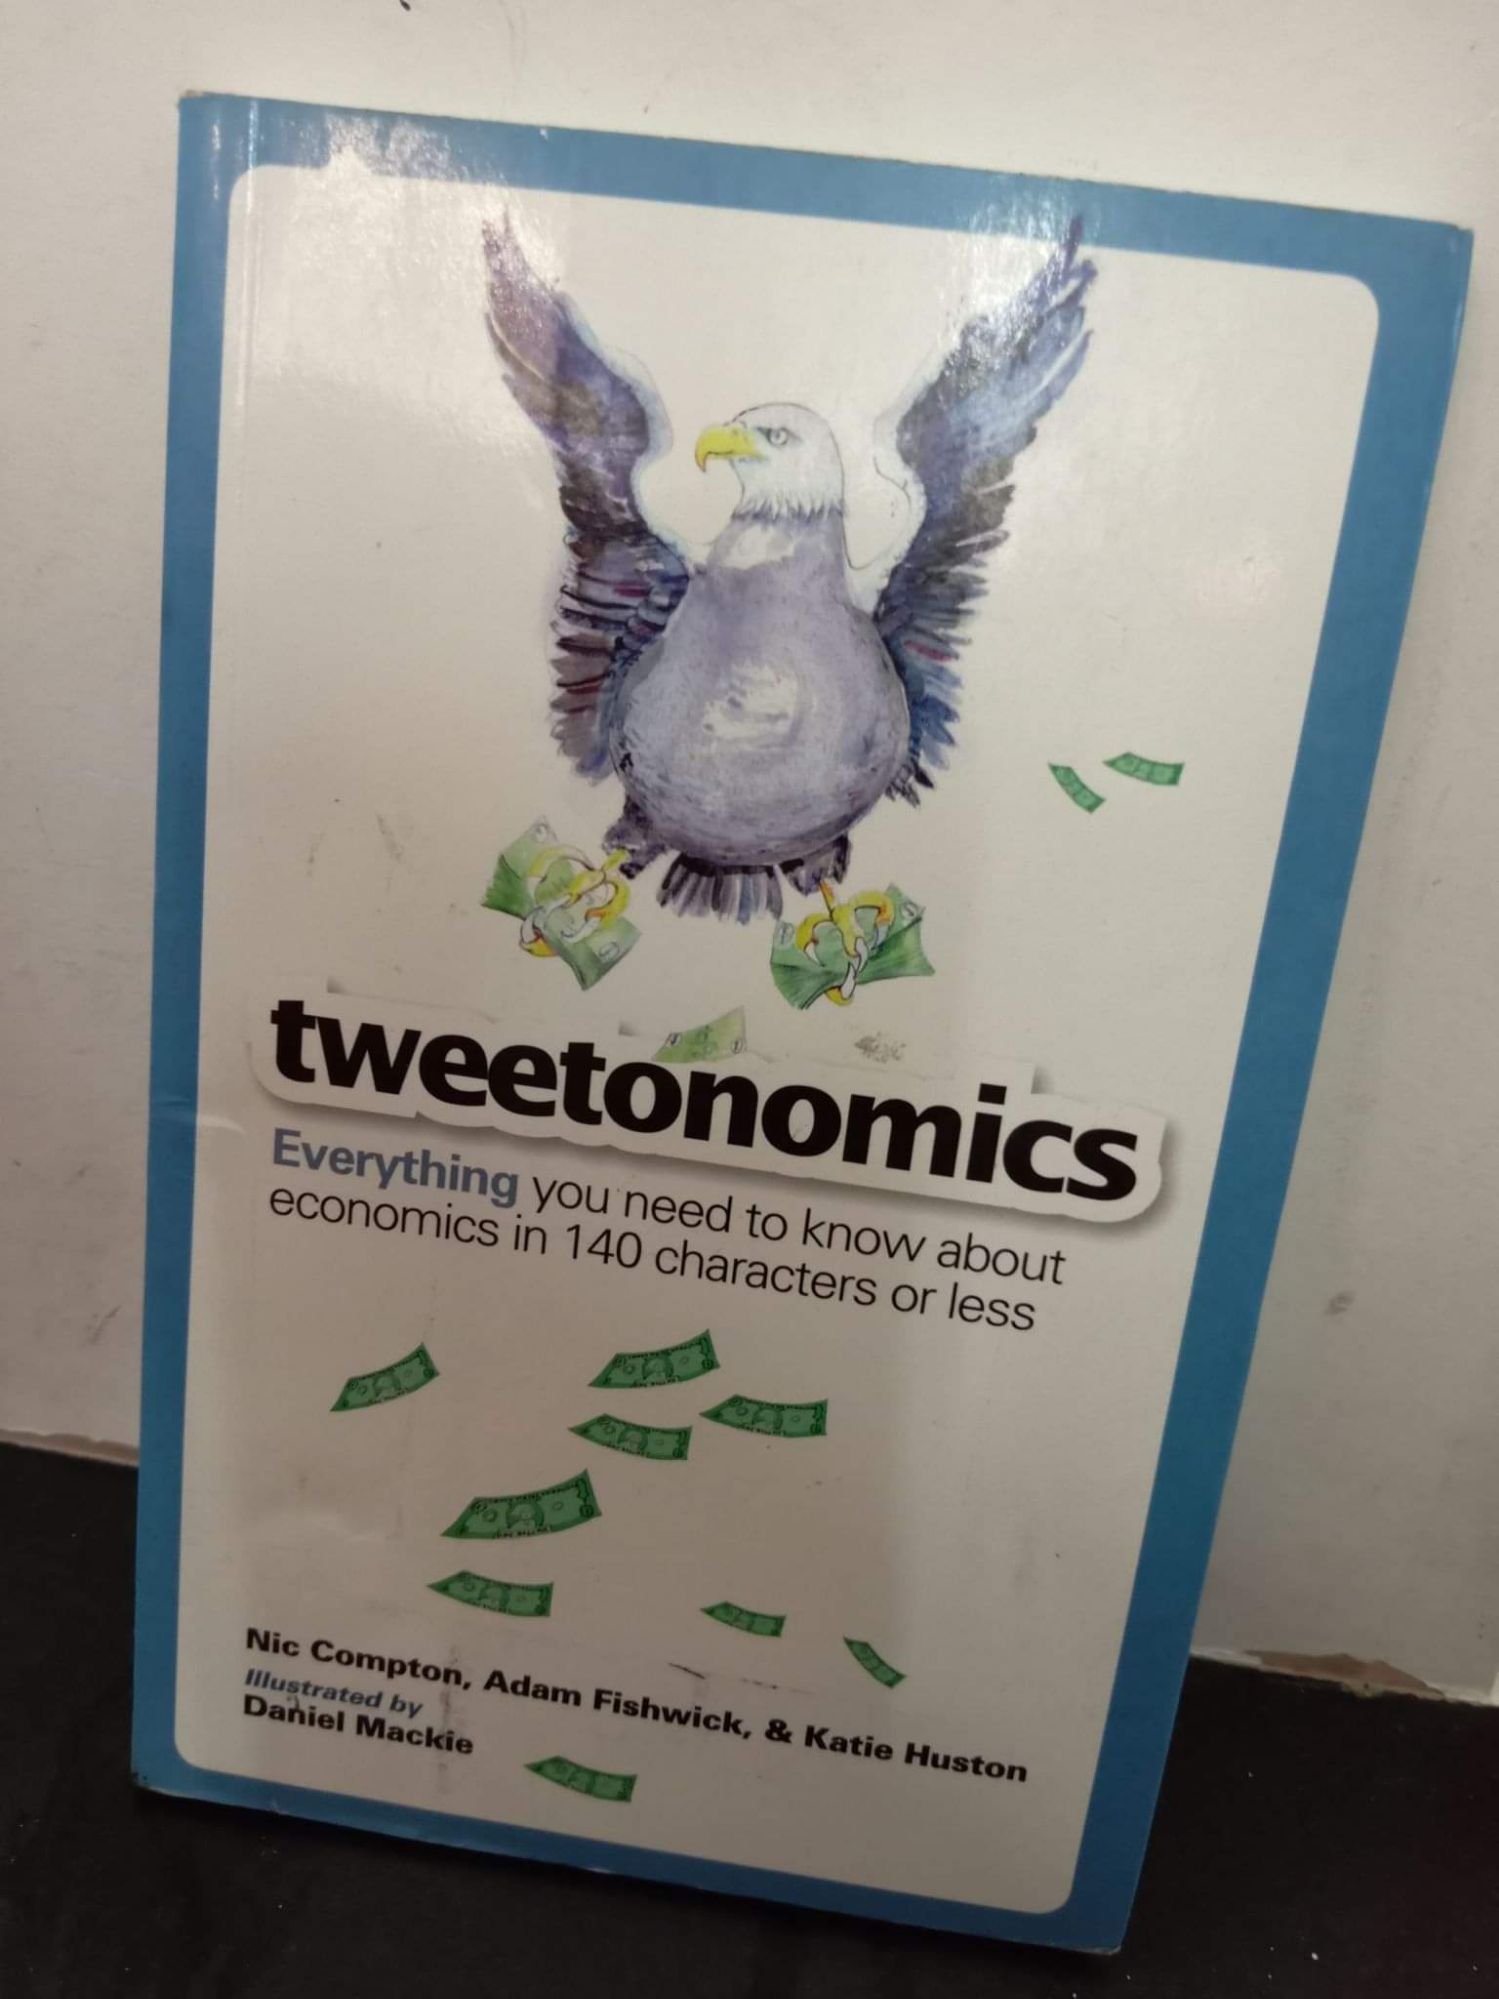 Tweetonomics: Everything You Need to Know About Economics in 140 Characters  or Less